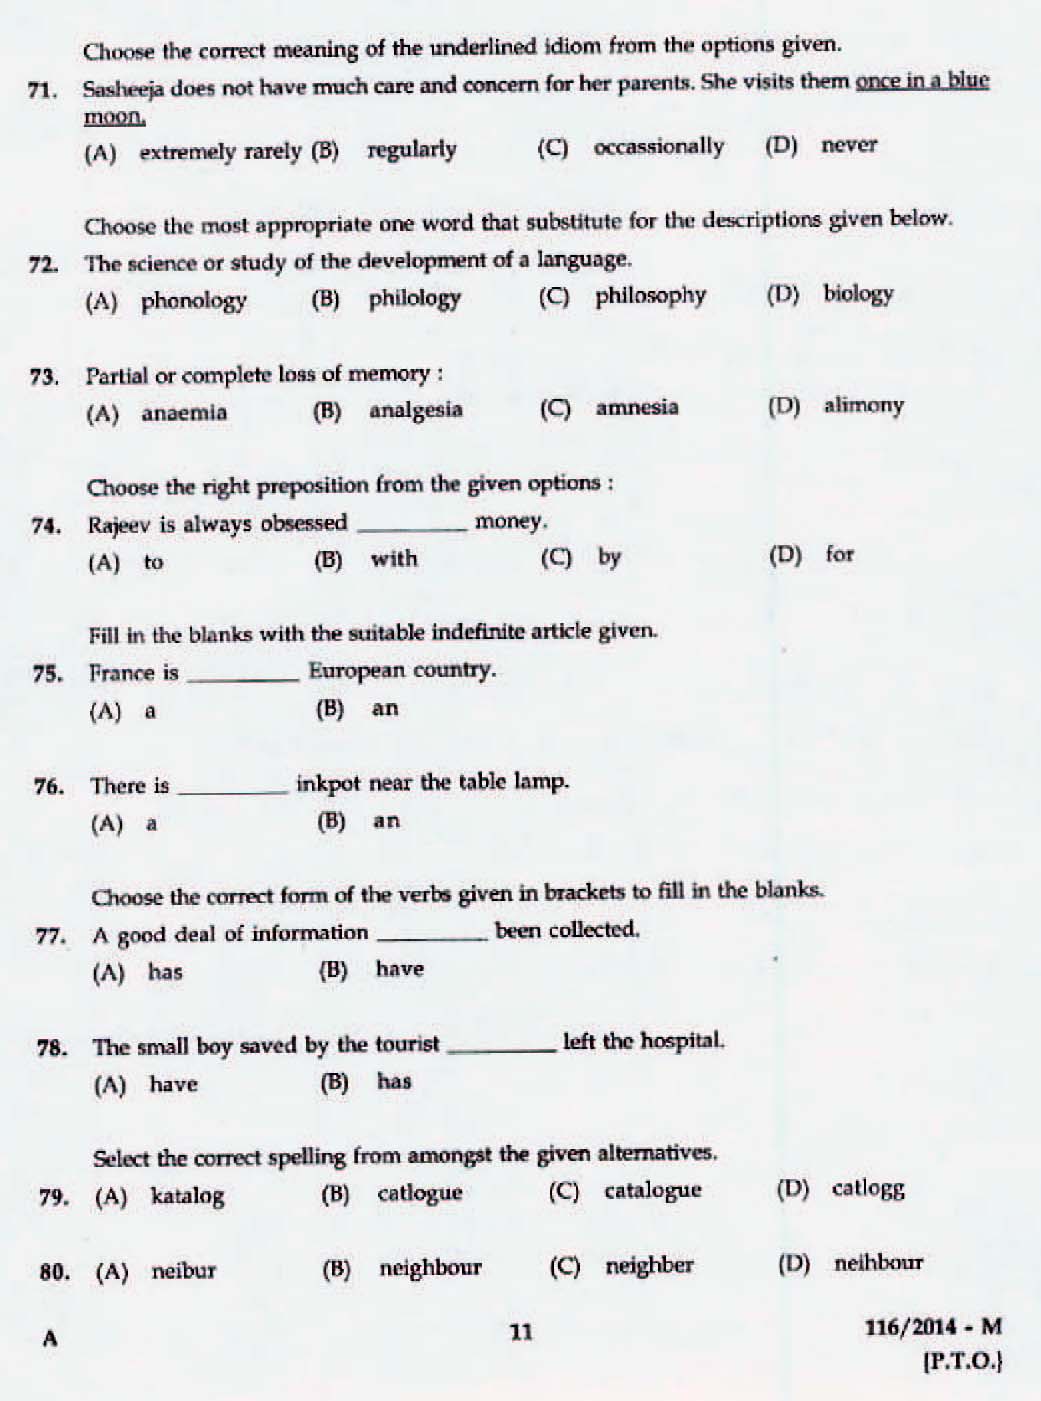 LD Clerk Various All Districts Question Paper Malayalam 2014 Paper Code 1162014 M 9